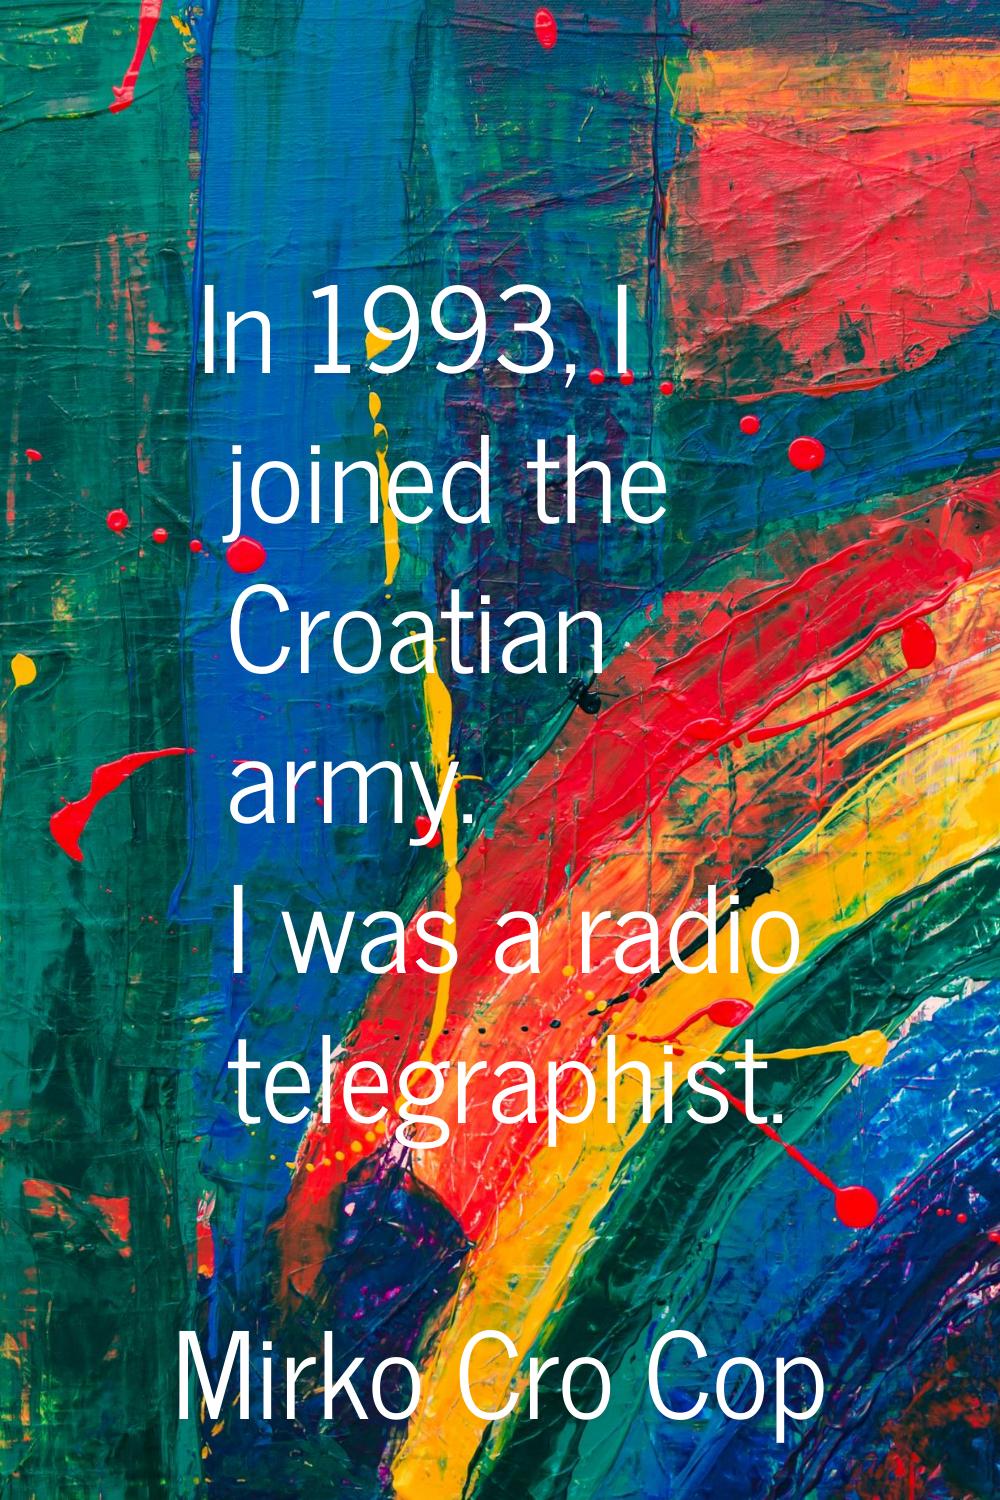 In 1993, I joined the Croatian army. I was a radio telegraphist.